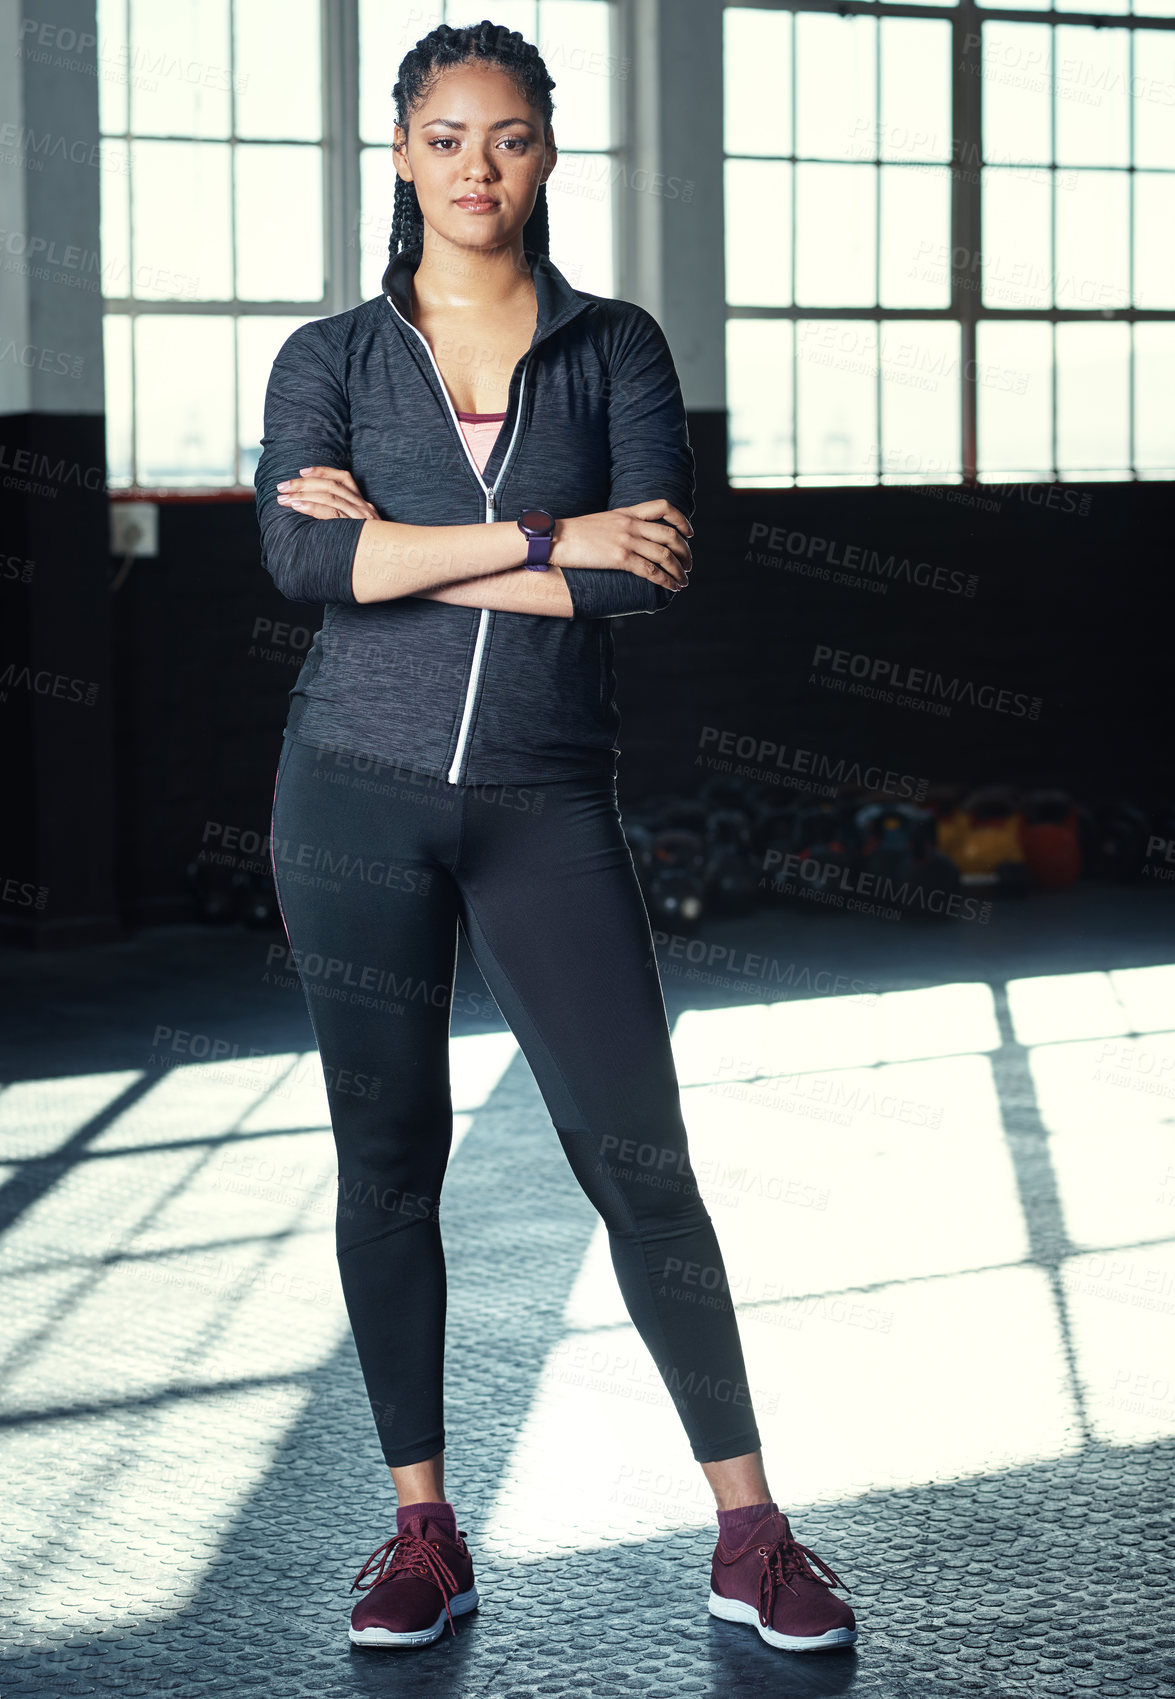 Buy stock photo Shot of a young woman in a gym